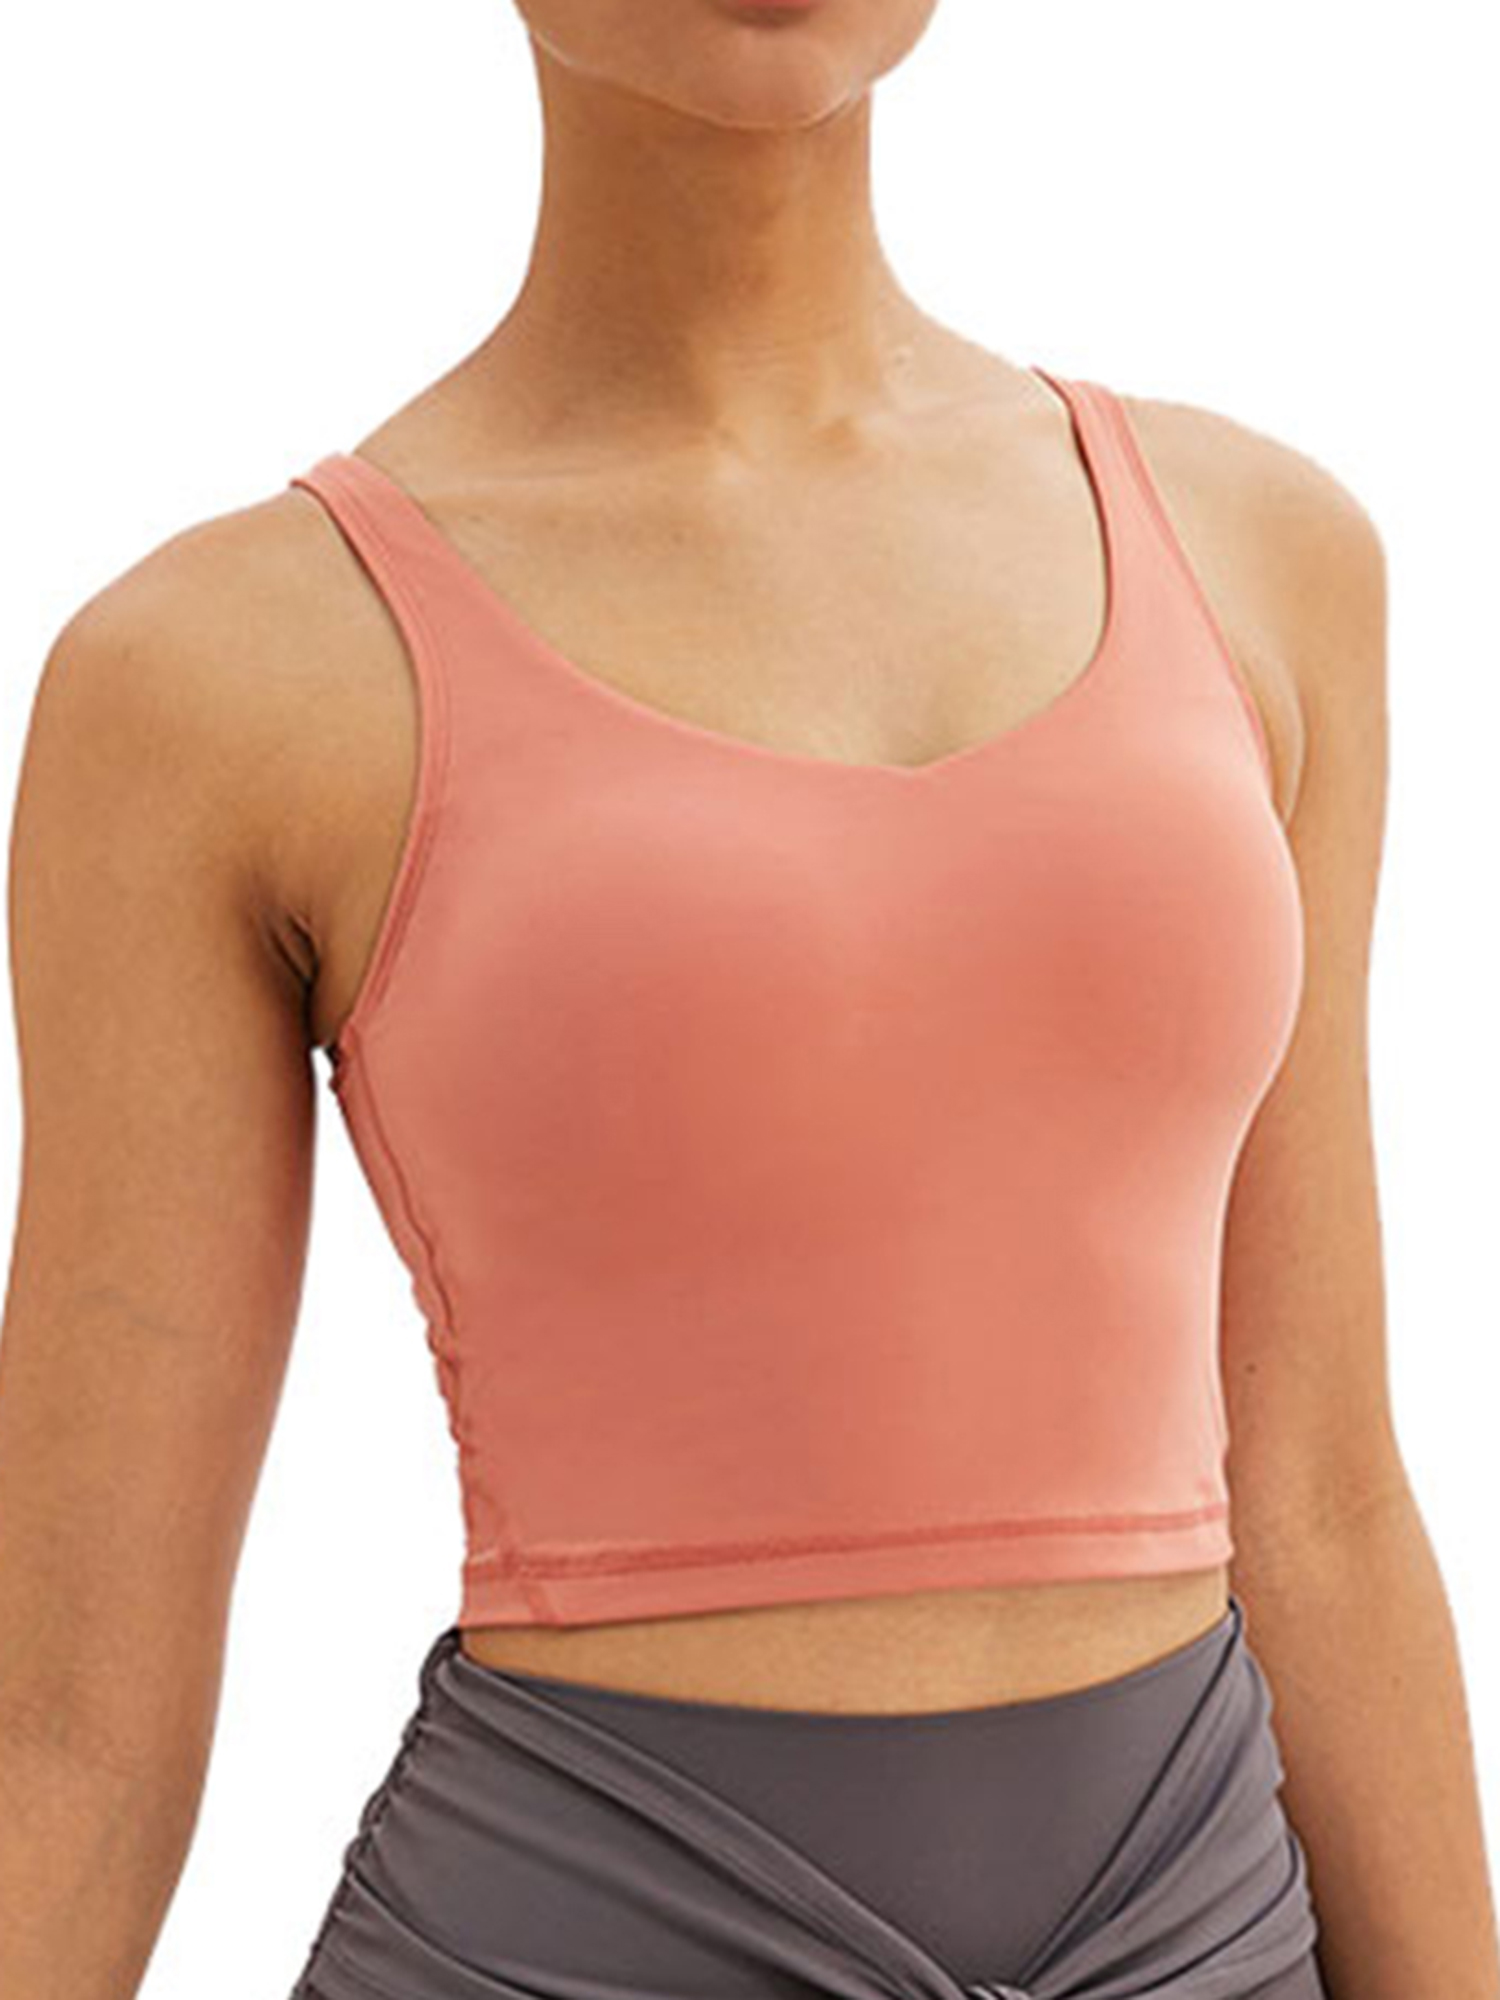 American Trends Tank Top for Women Athletic Cami Sports Shirts Fitness Workout Yoga Tank Top Padded Sports Bra for Women